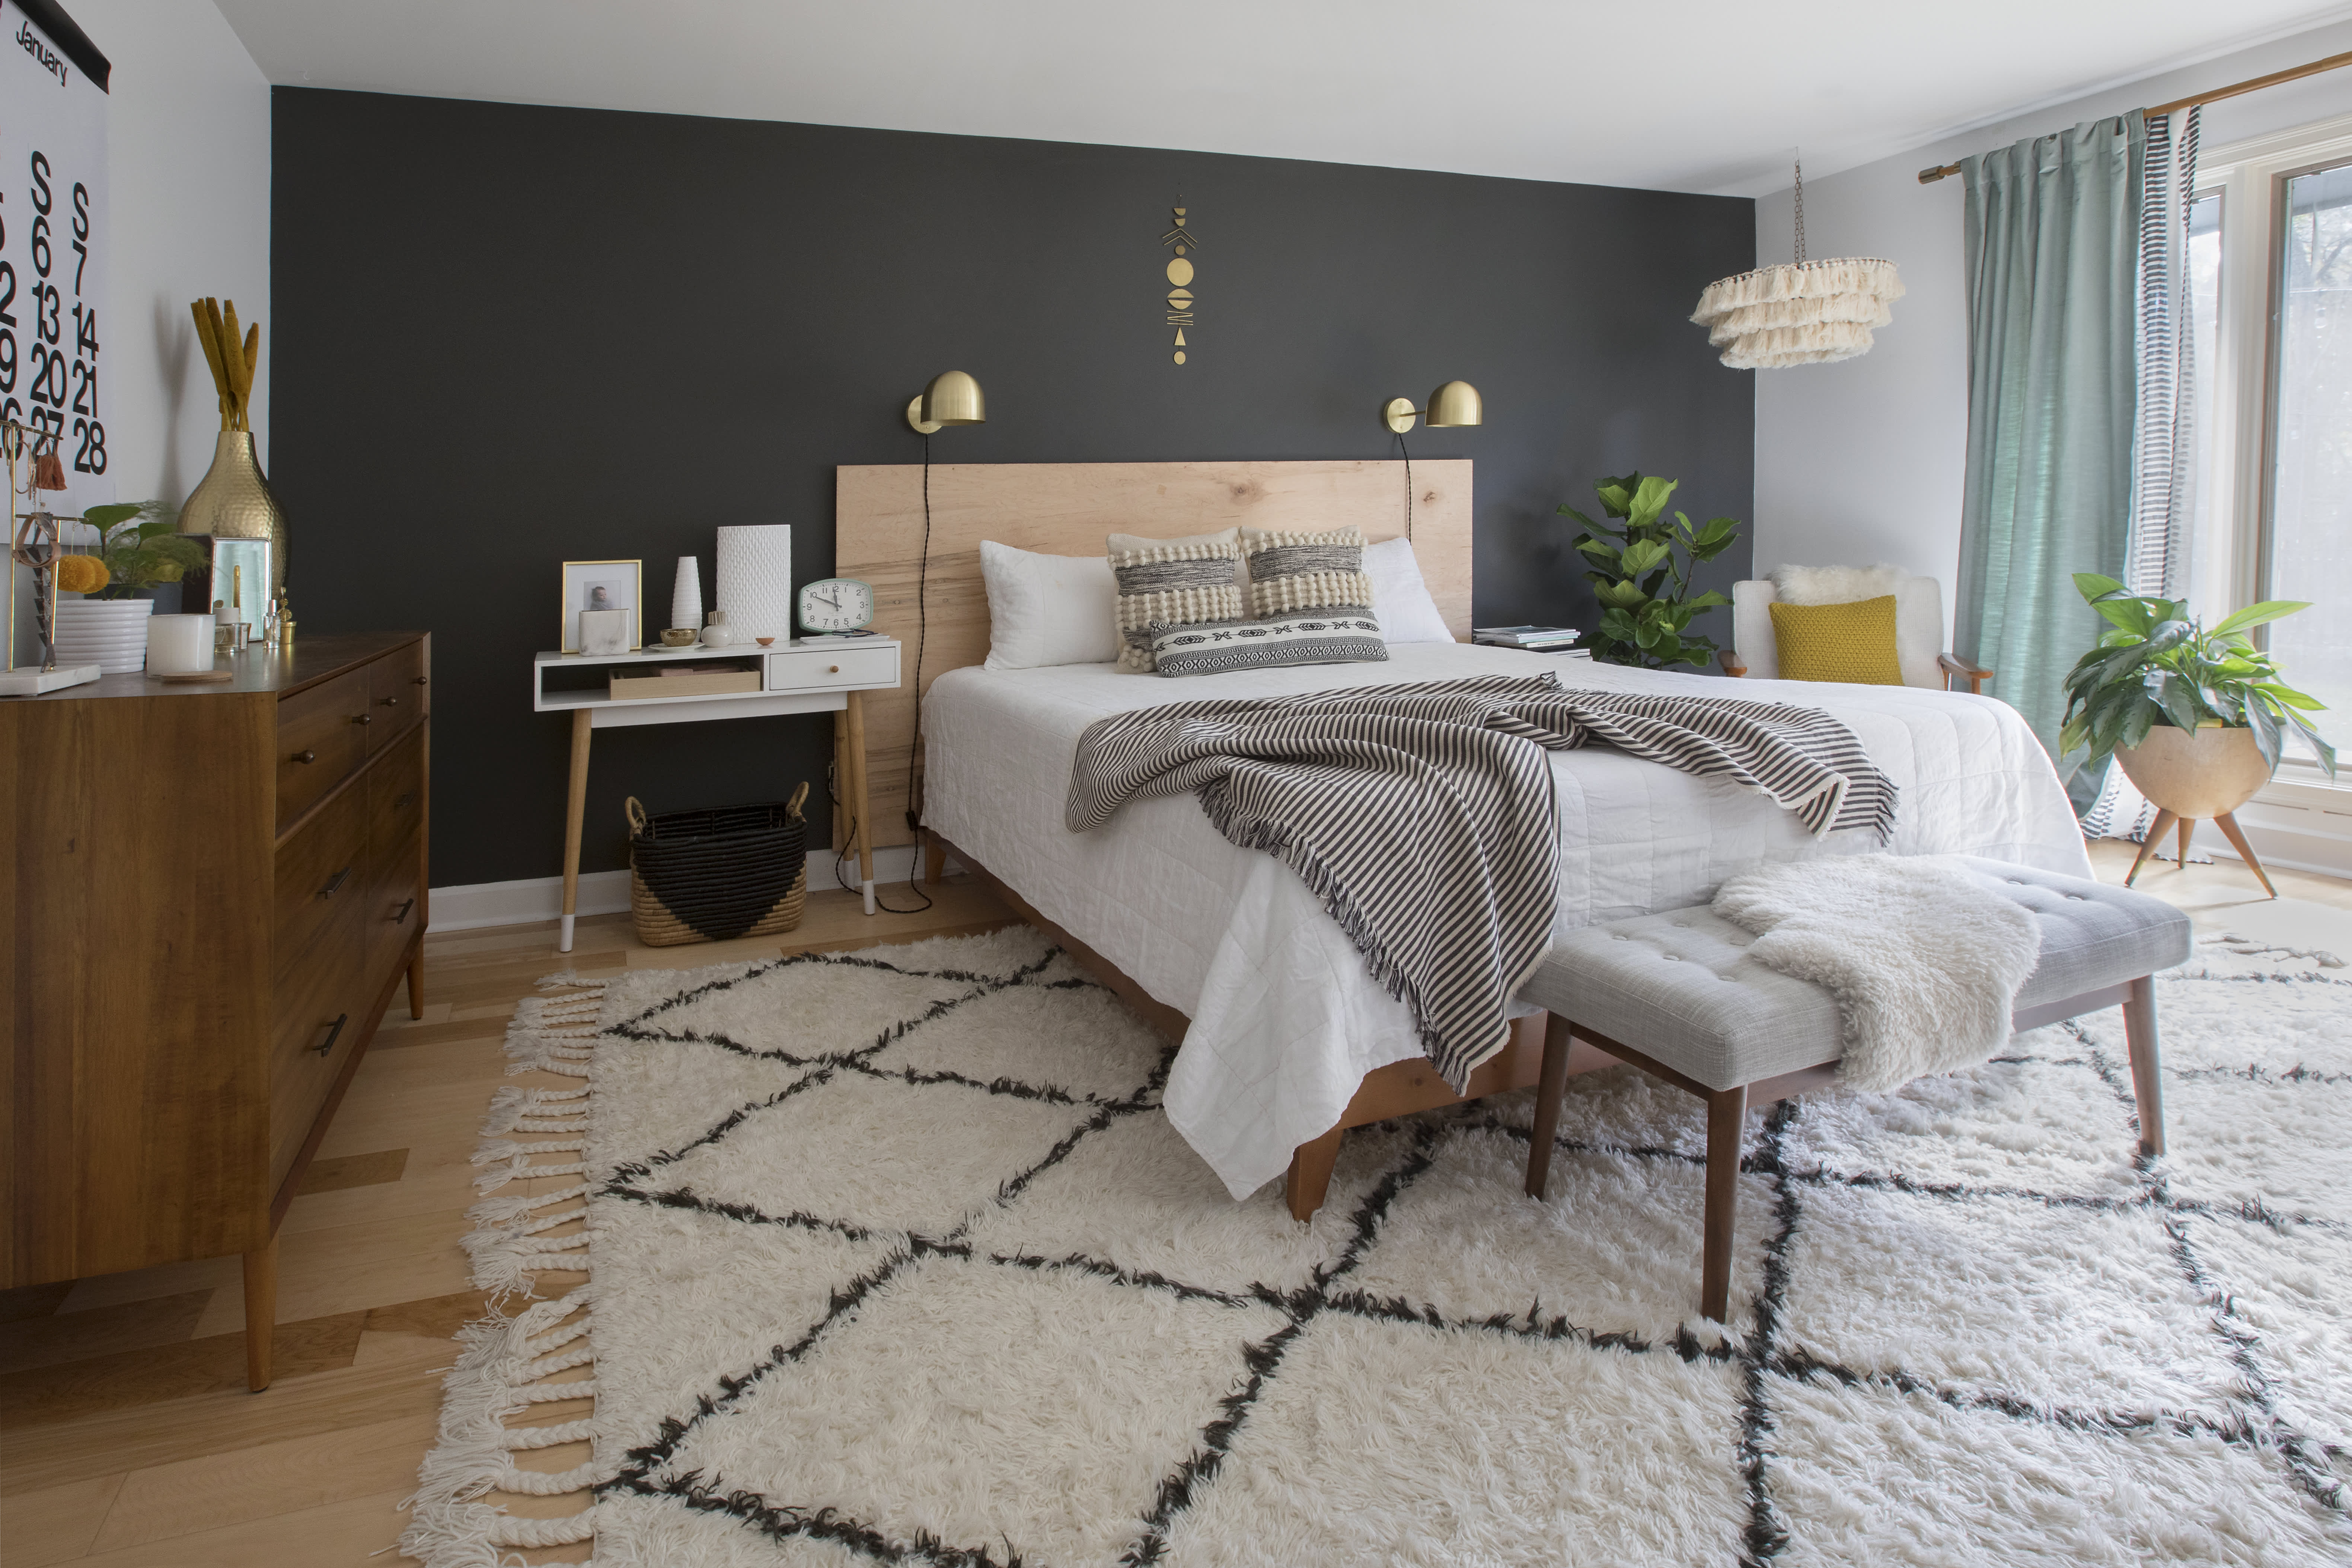 25 Ideas to Style a Room With Black Walls - A House in the Hills